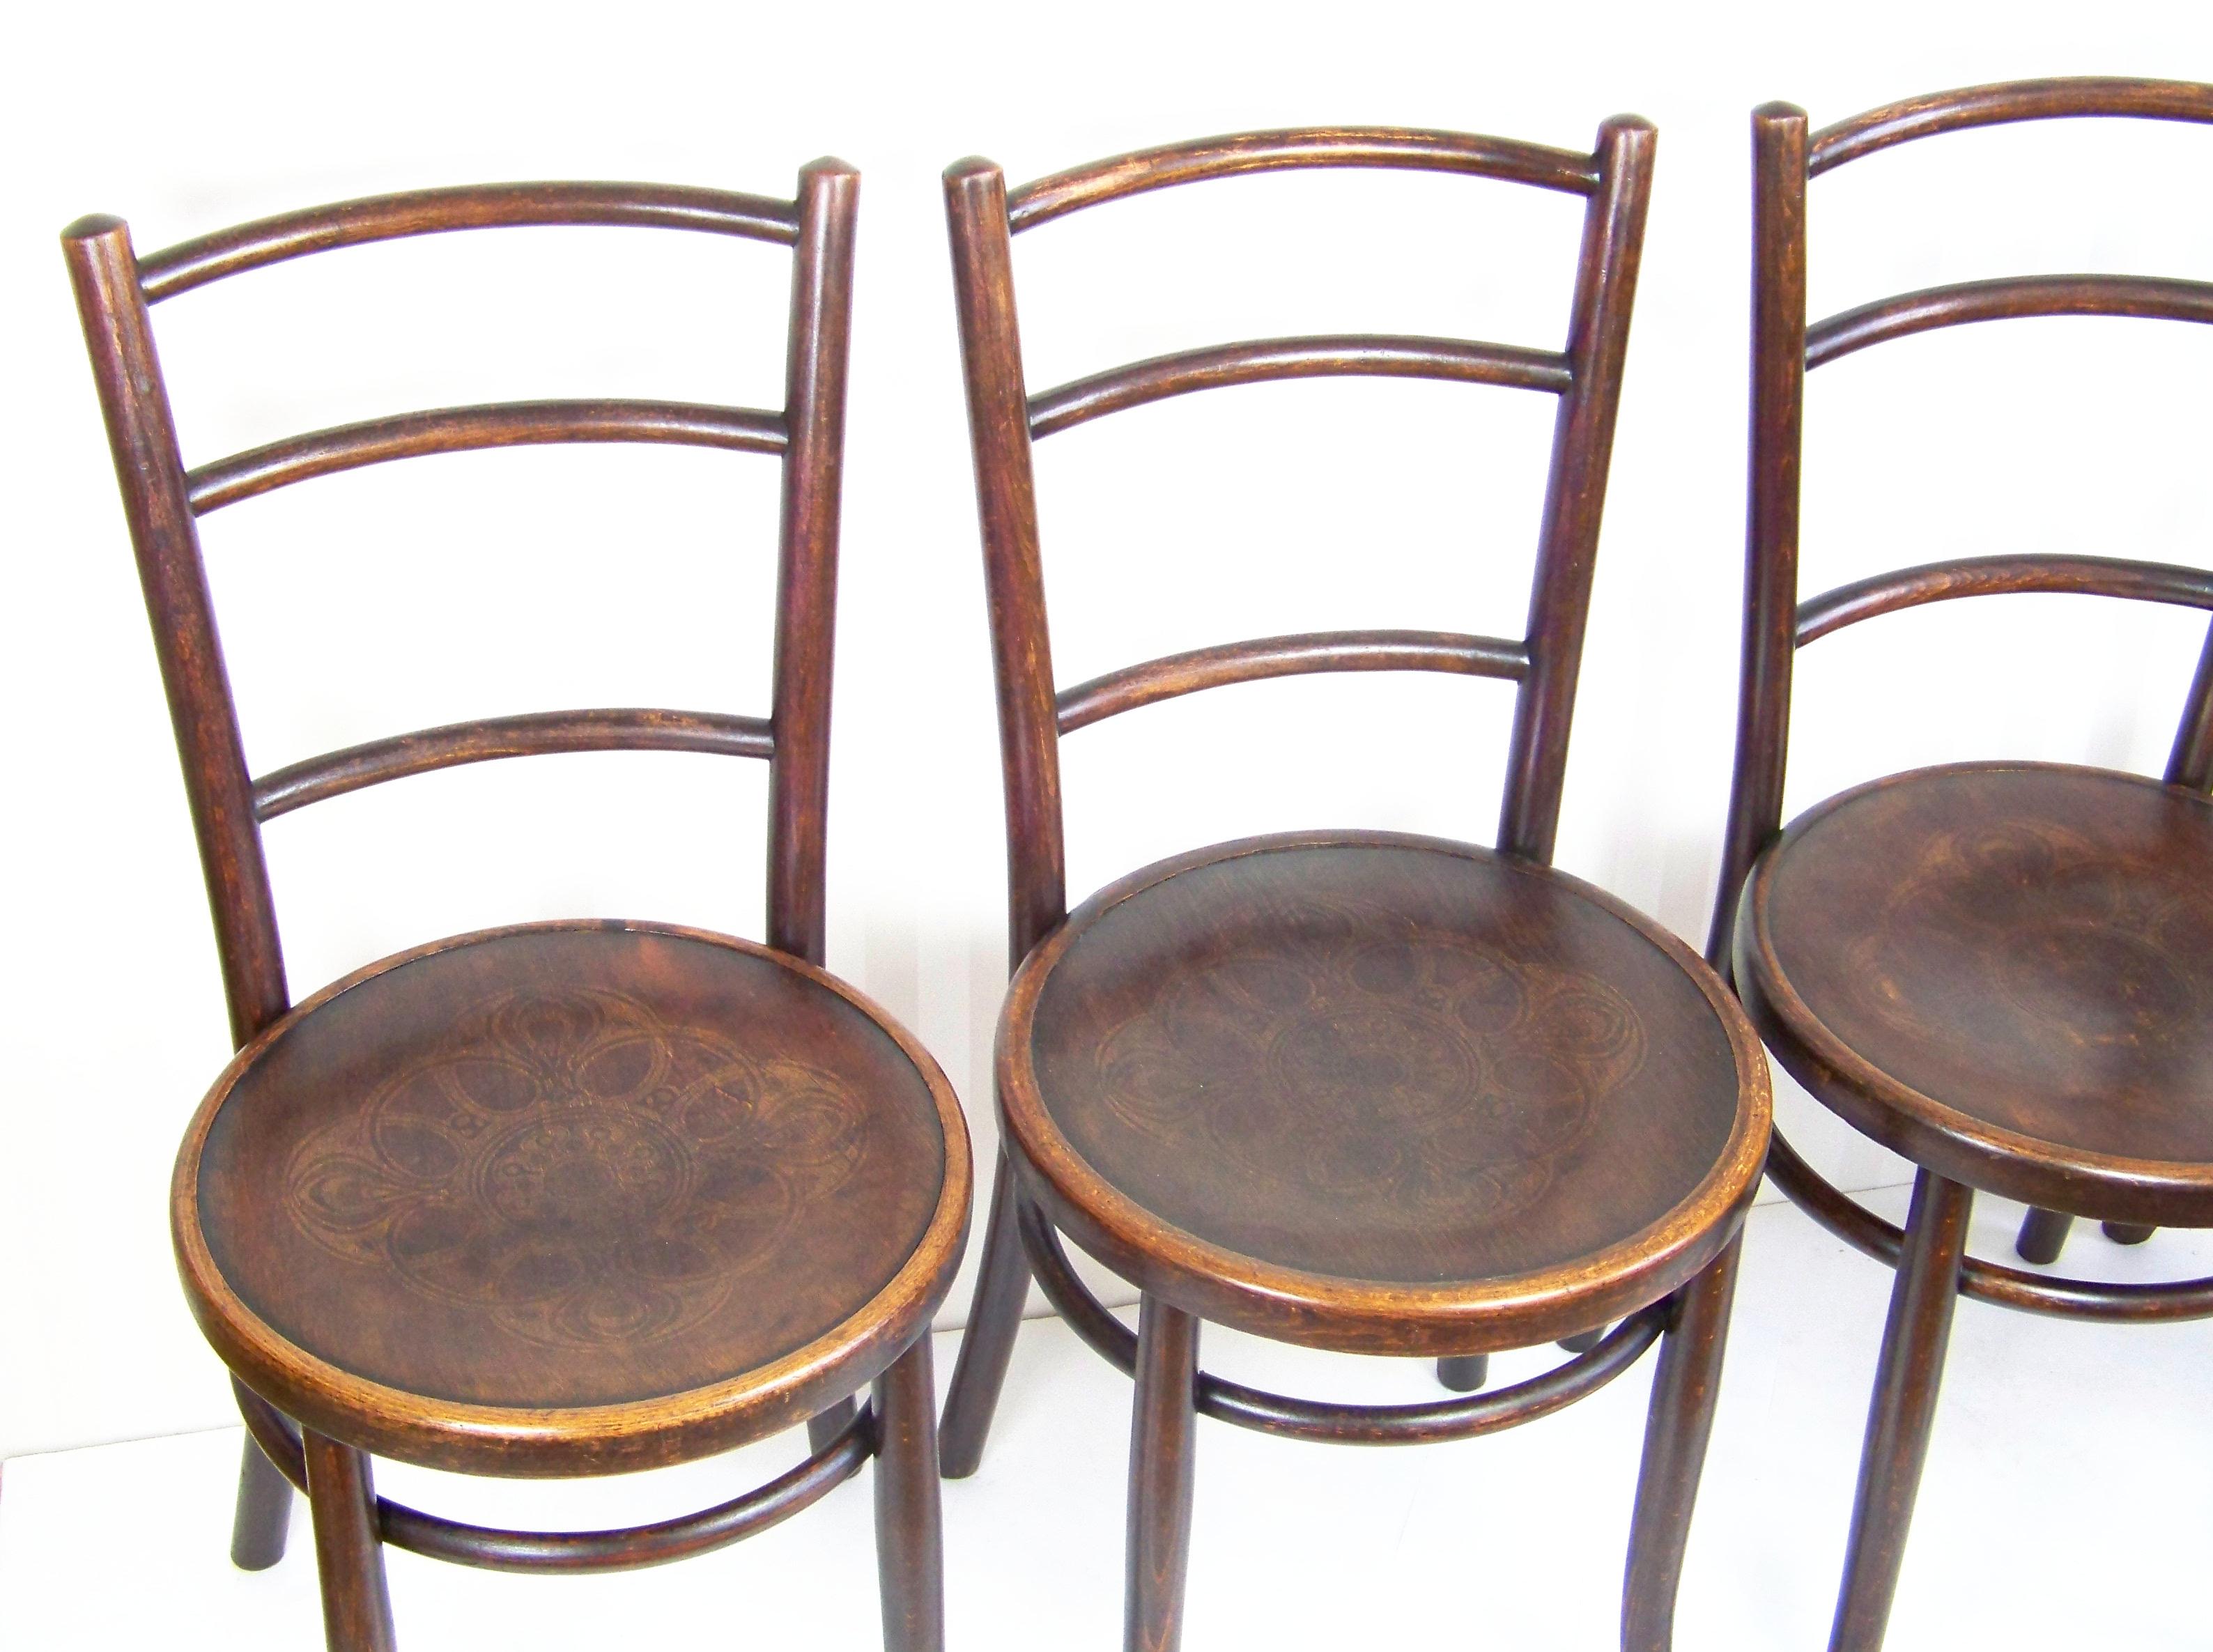 Original state with a pleasant patina of age, perfectly cleaned and repolished with shellac.